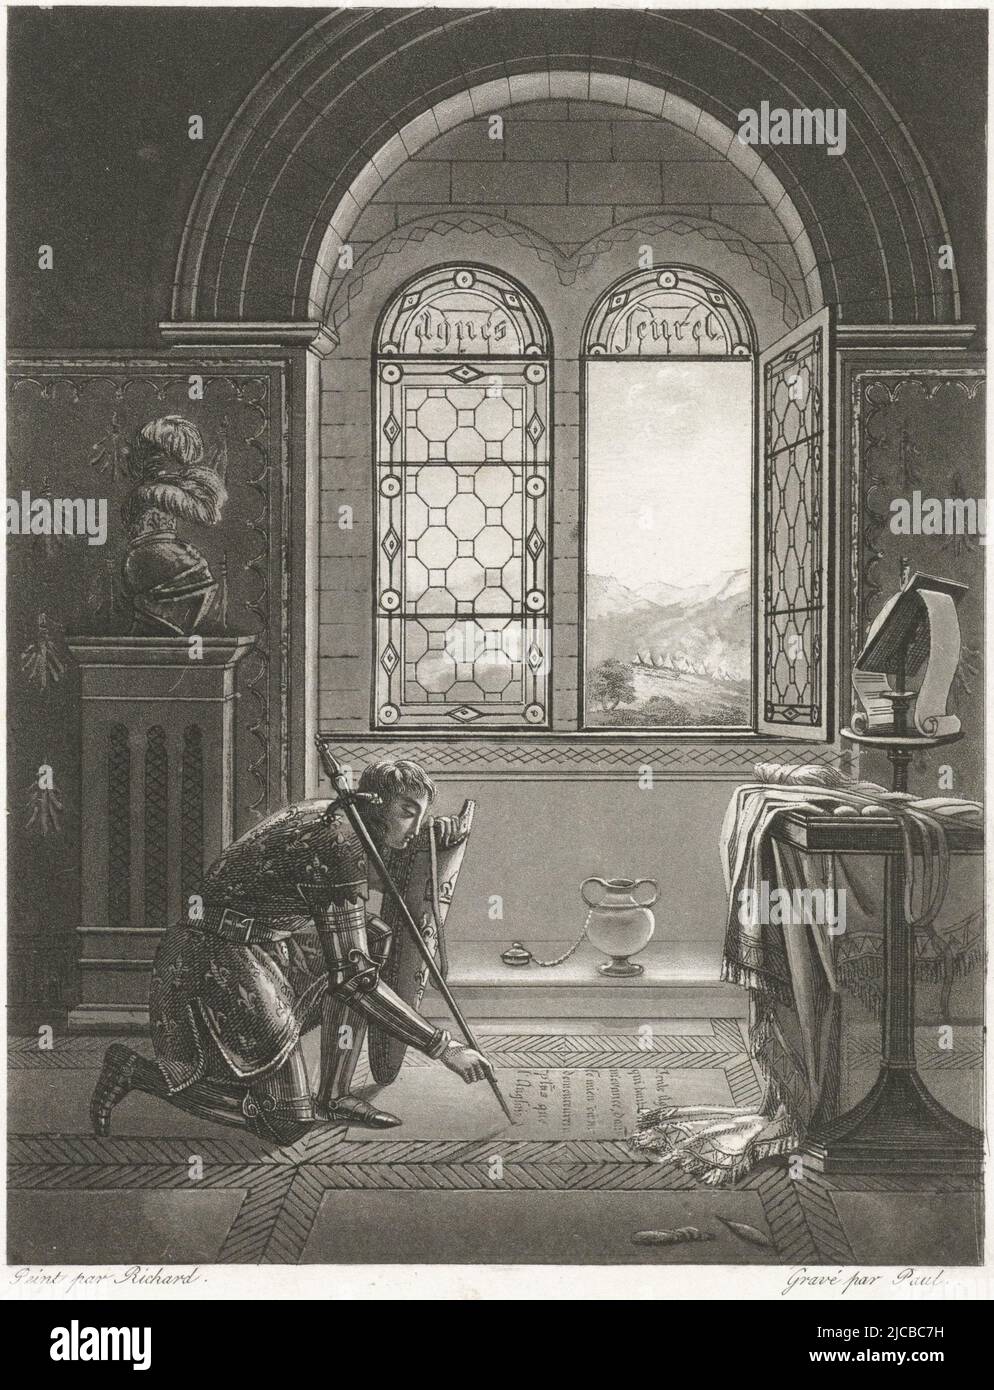 Castle room with Joan of Arc in armor She scratches a French text about the English into the stone floor with her lance The stained glass window bears the name of Agnes Sorel Agnes Seurel, the mistress of Charles VII of France, Castle Room with Joan of Arc, print maker: Paul (graveur), (mentioned on object), after: Richard, (mentioned on object), France, 1750 - 1850, paper, etching, h 169 mm × w 144 mm Stock Photo